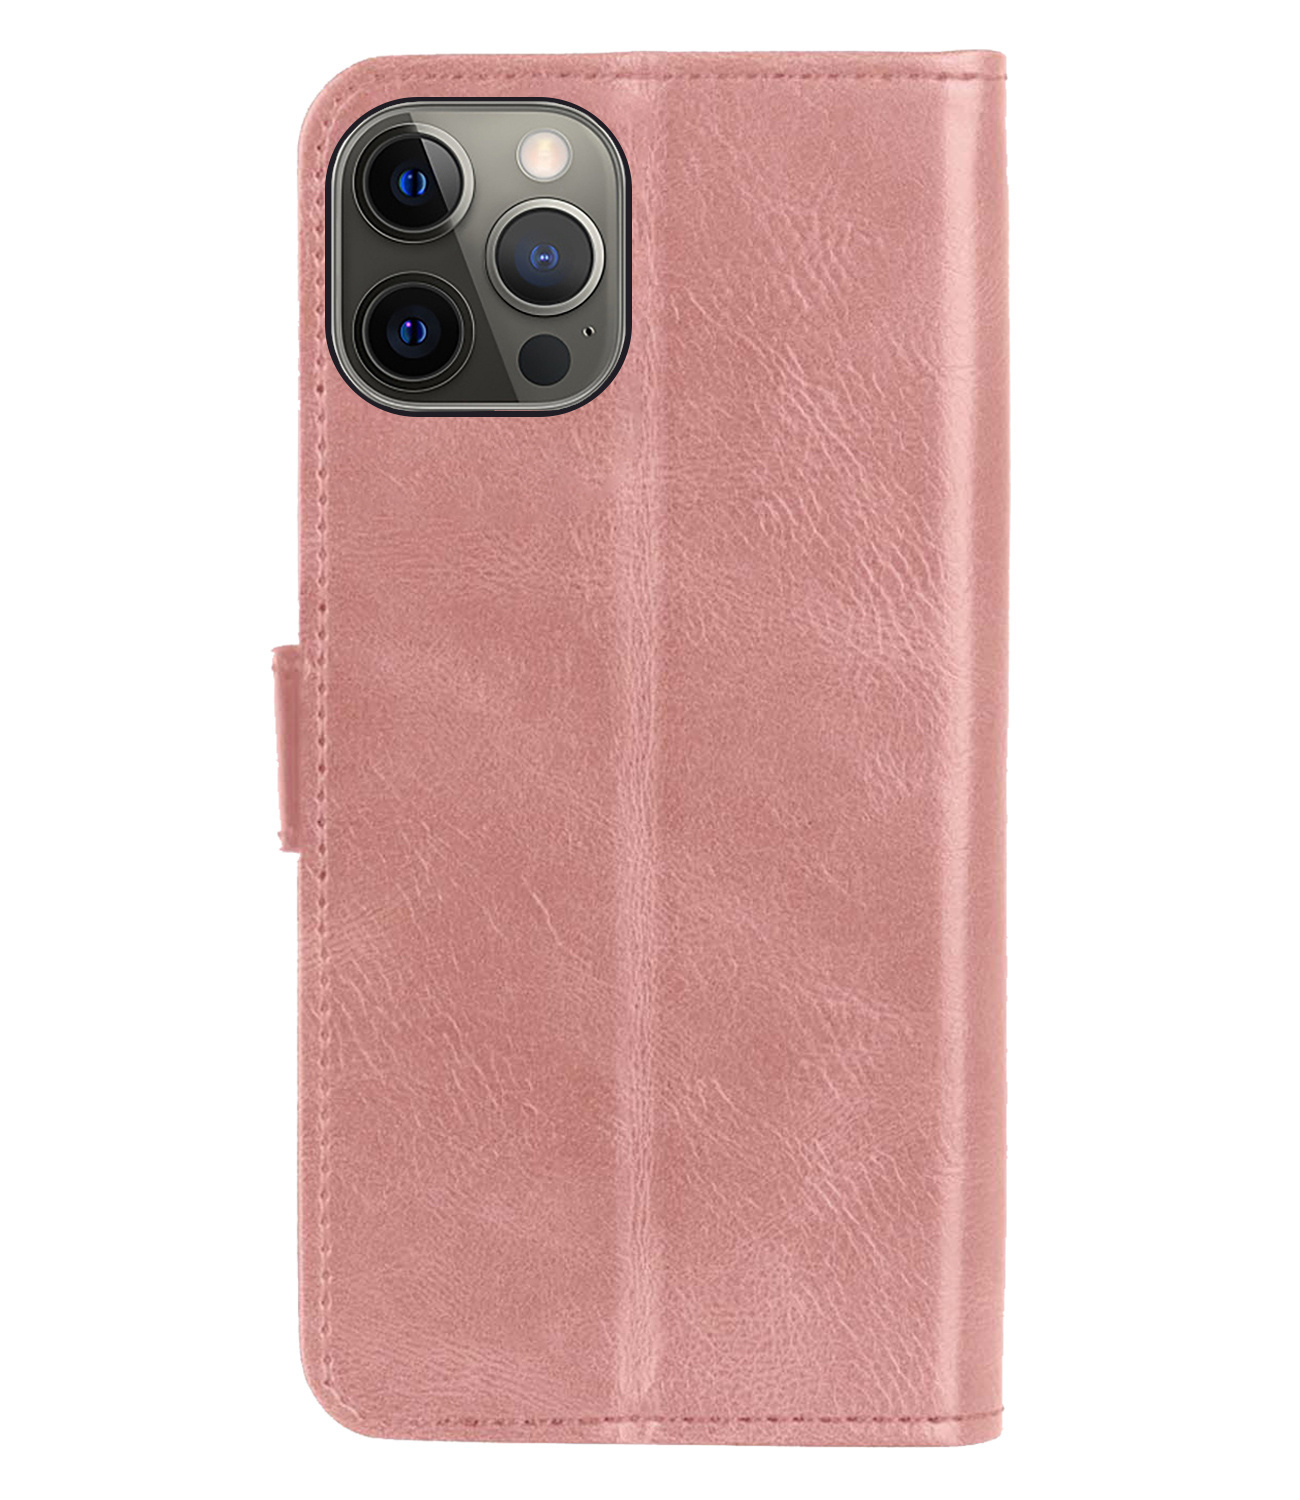 Hoes voor iPhone 14 Pro Max Hoes Bookcase Flipcase Book Cover - Hoes voor iPhone 14 Pro Max Hoesje Book Case - Rose Goud